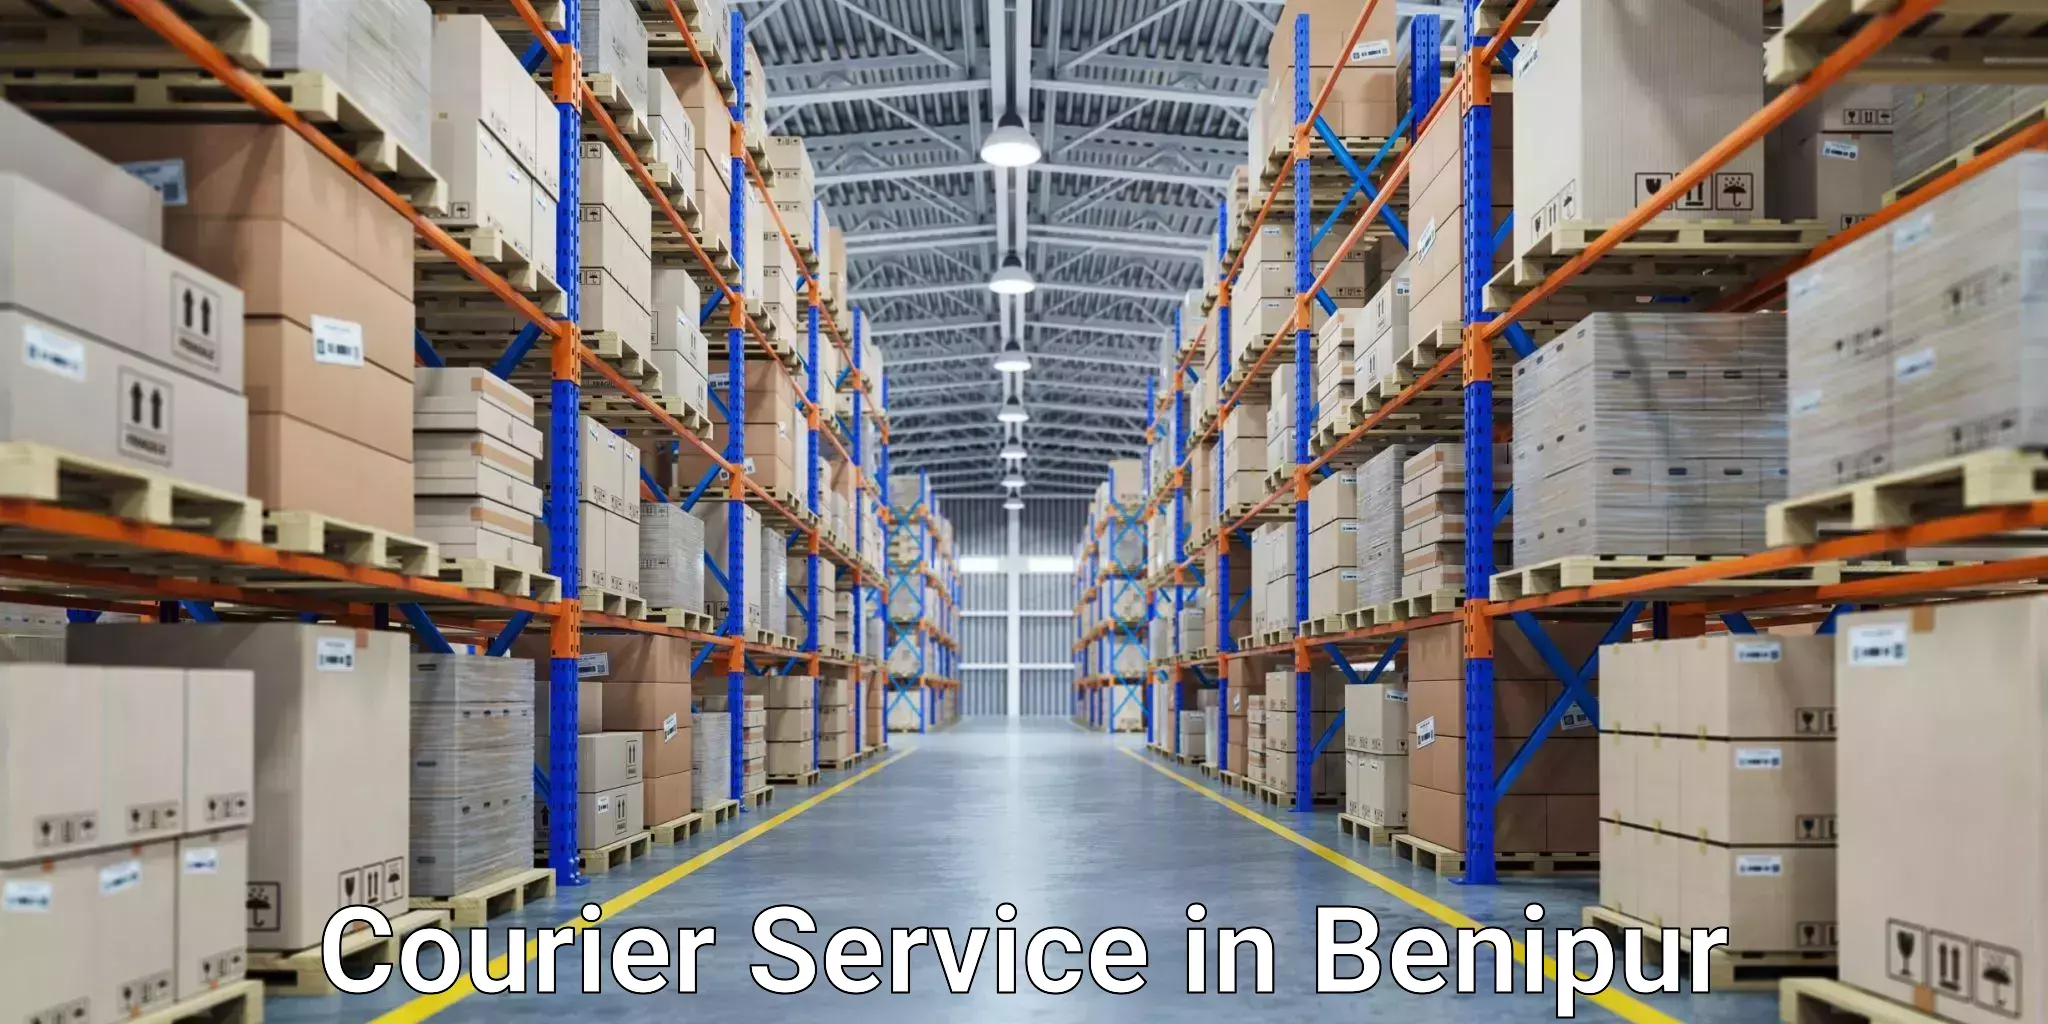 Express package services in Benipur